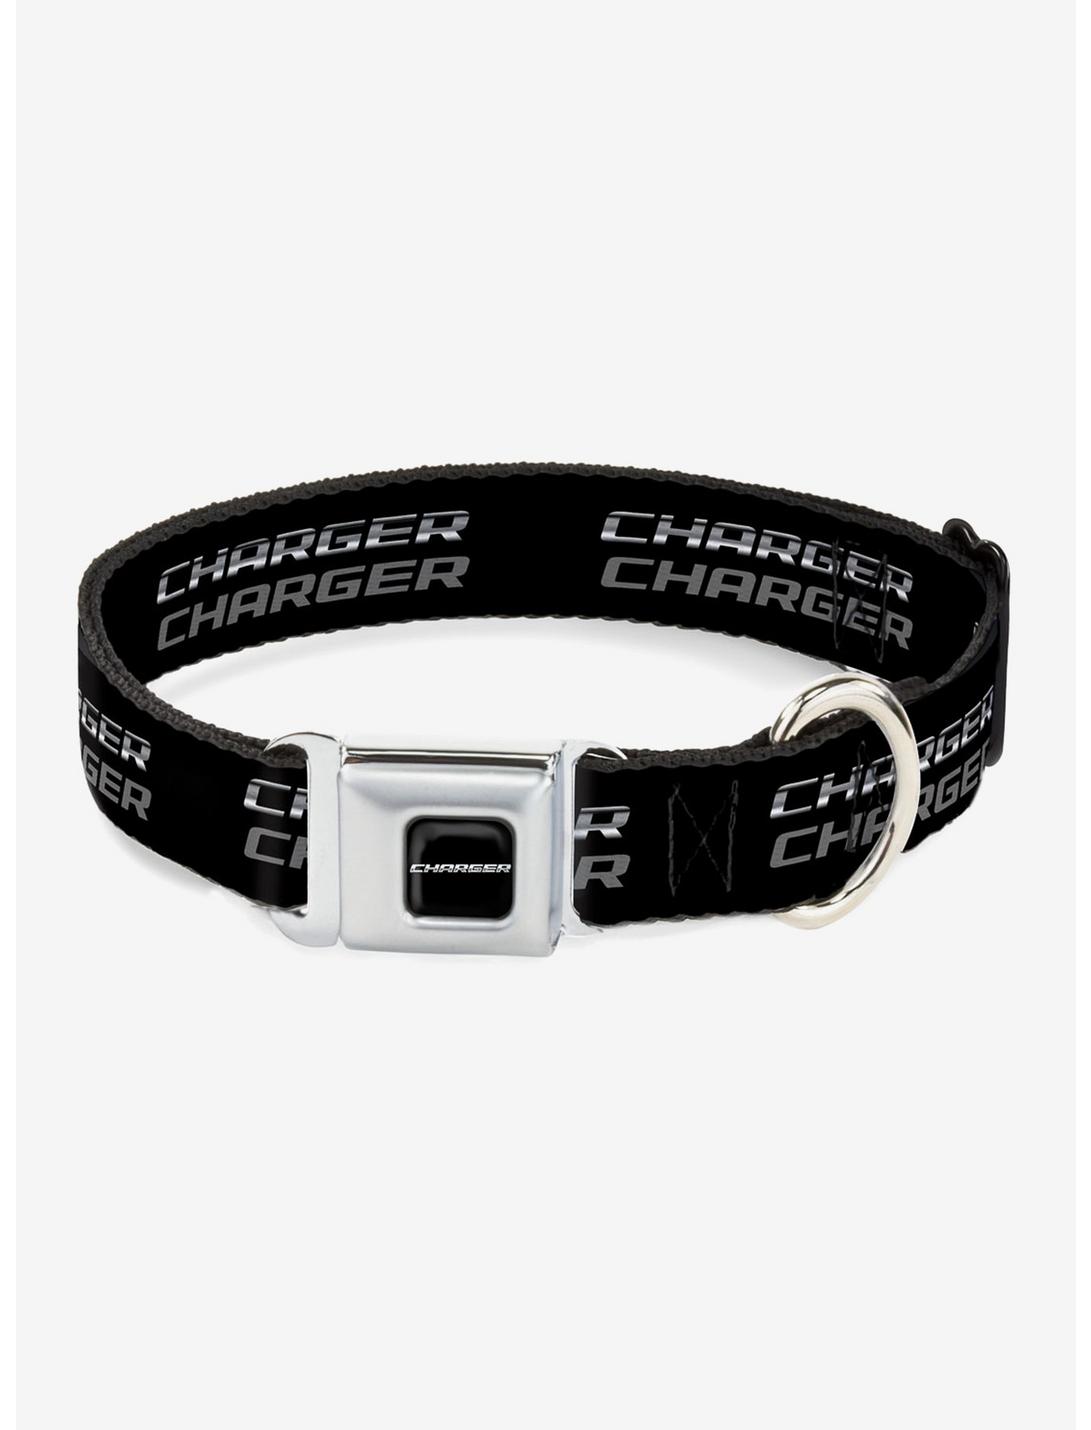 Charger Double Repeat Seatbelt Buckle Dog Collar, BLACK, hi-res